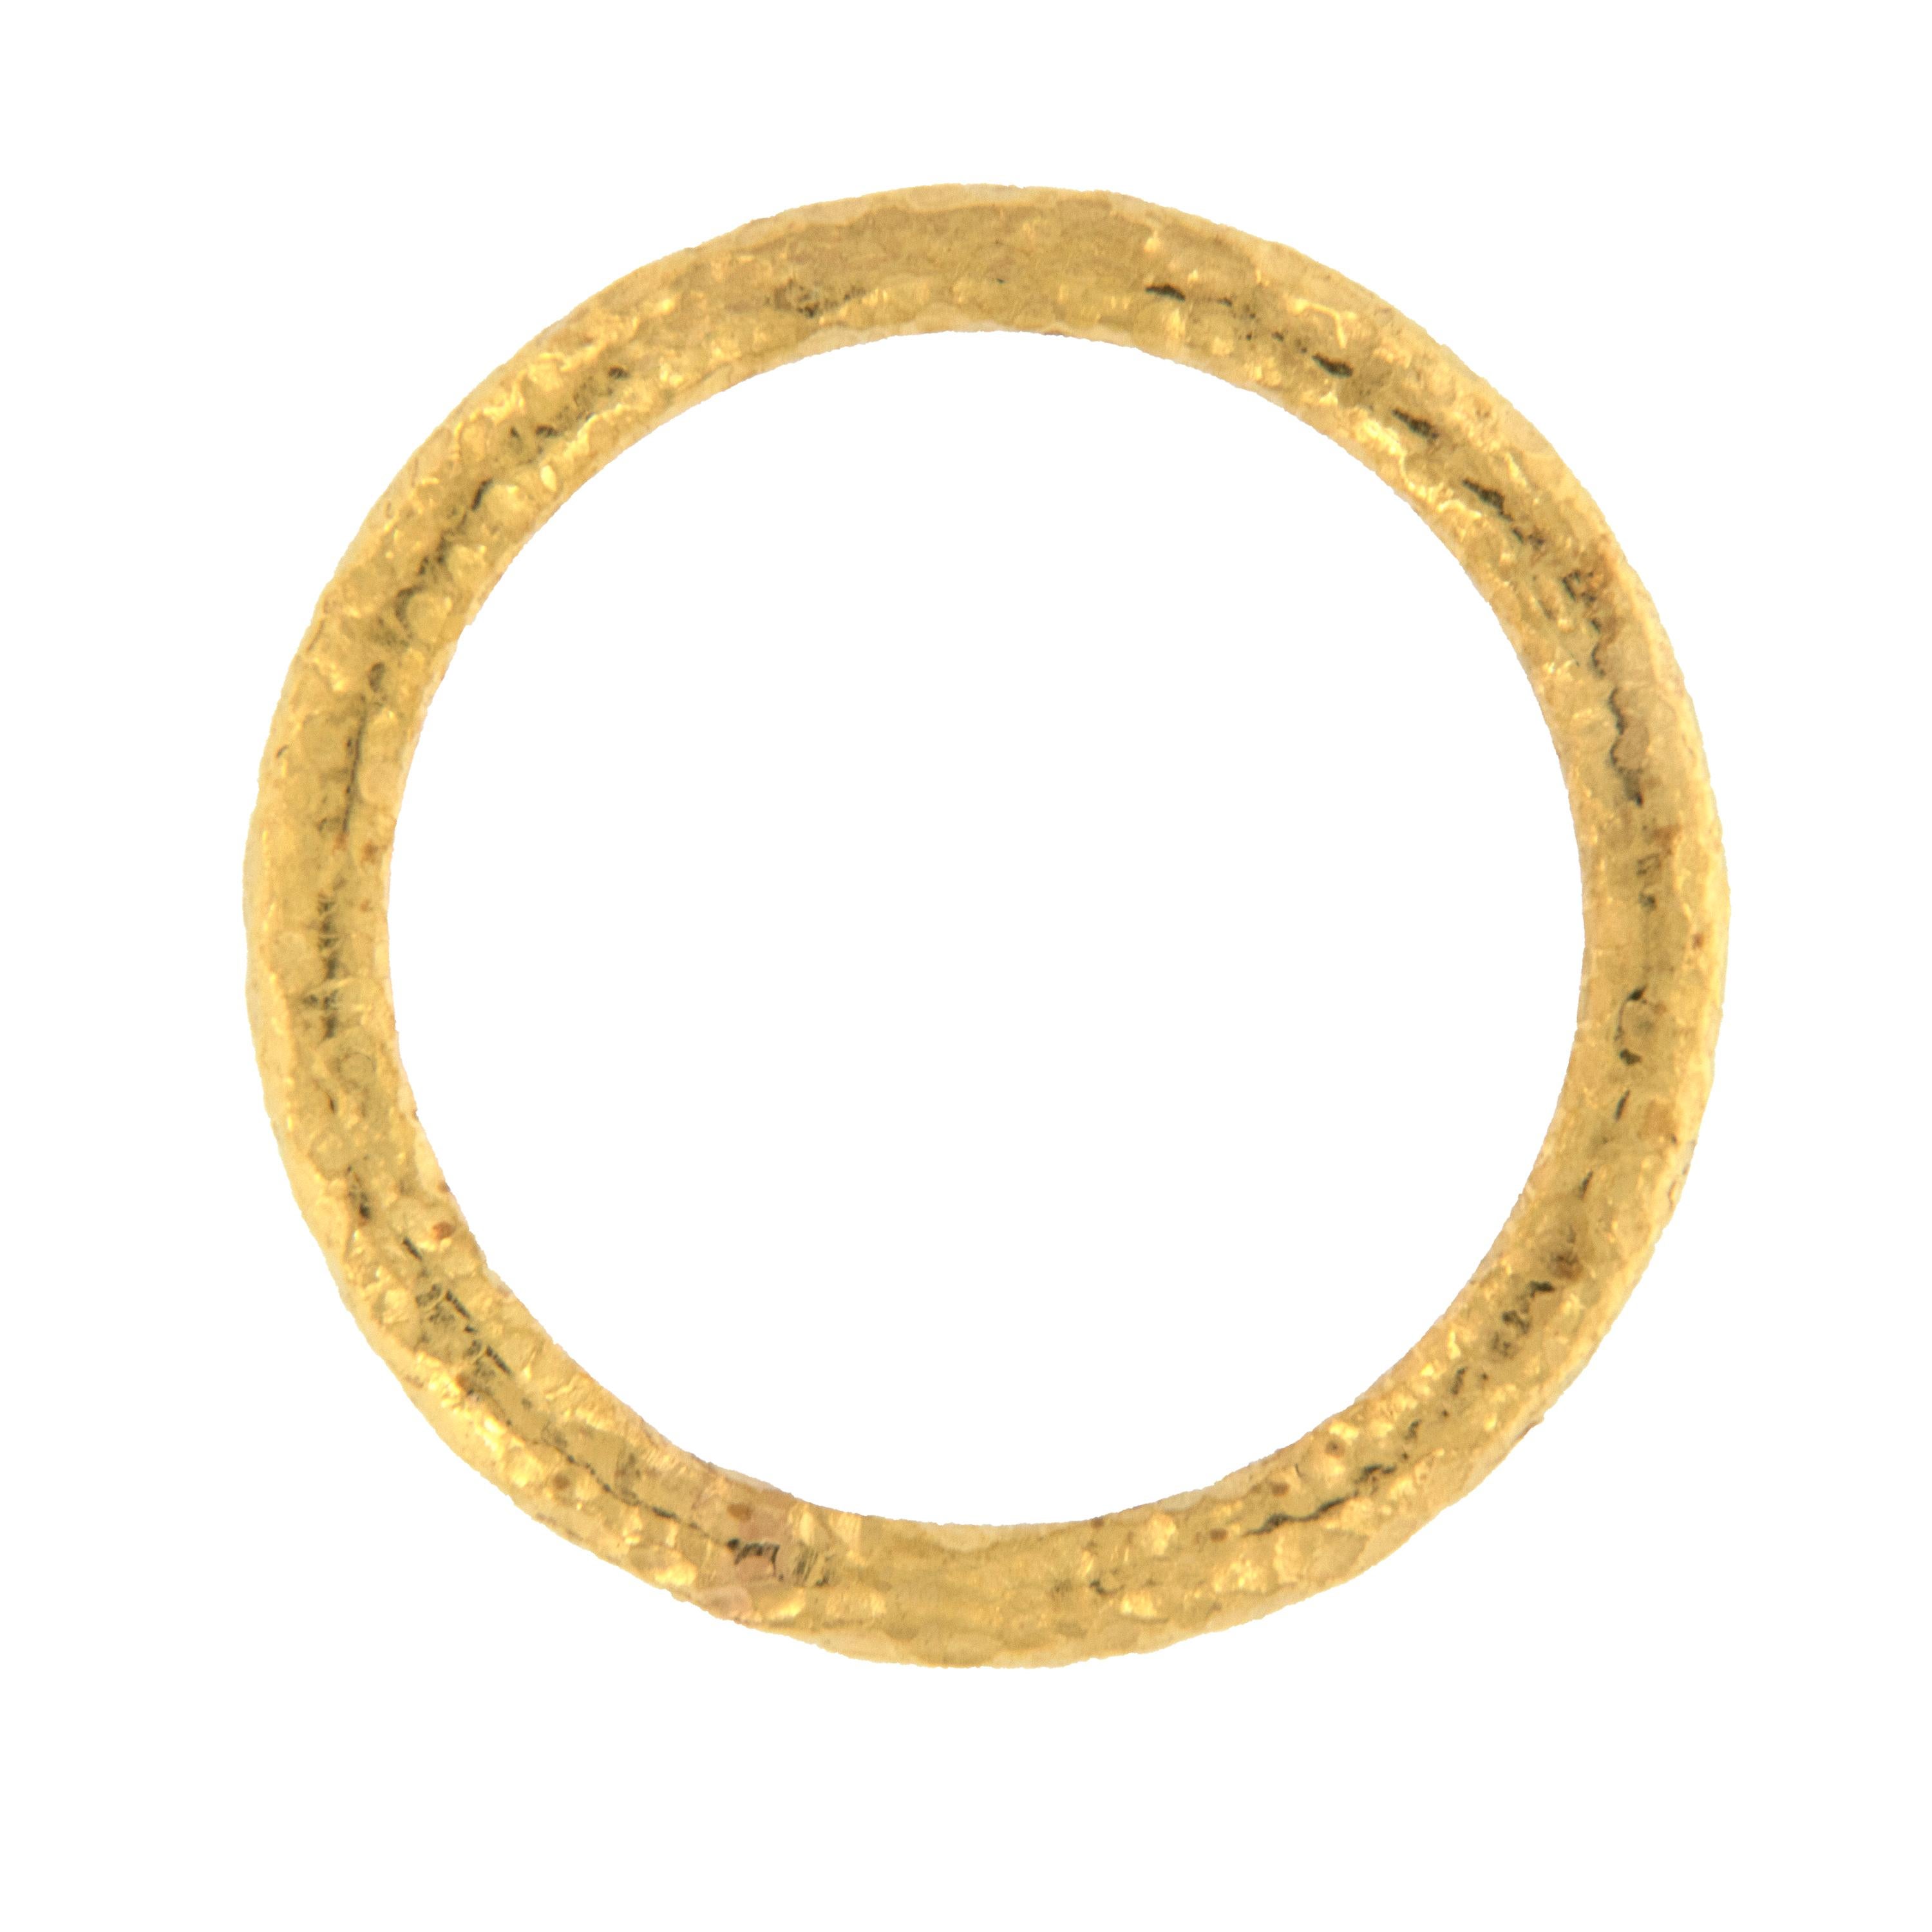 Rarest of all the golds, 24 karat gold is valued by all discerning investors. With it's unmistakable warm yellow color & hammered finish, this band ring makes a wonderful addition to your hand! Can be worn alone or as an accent with other rings.